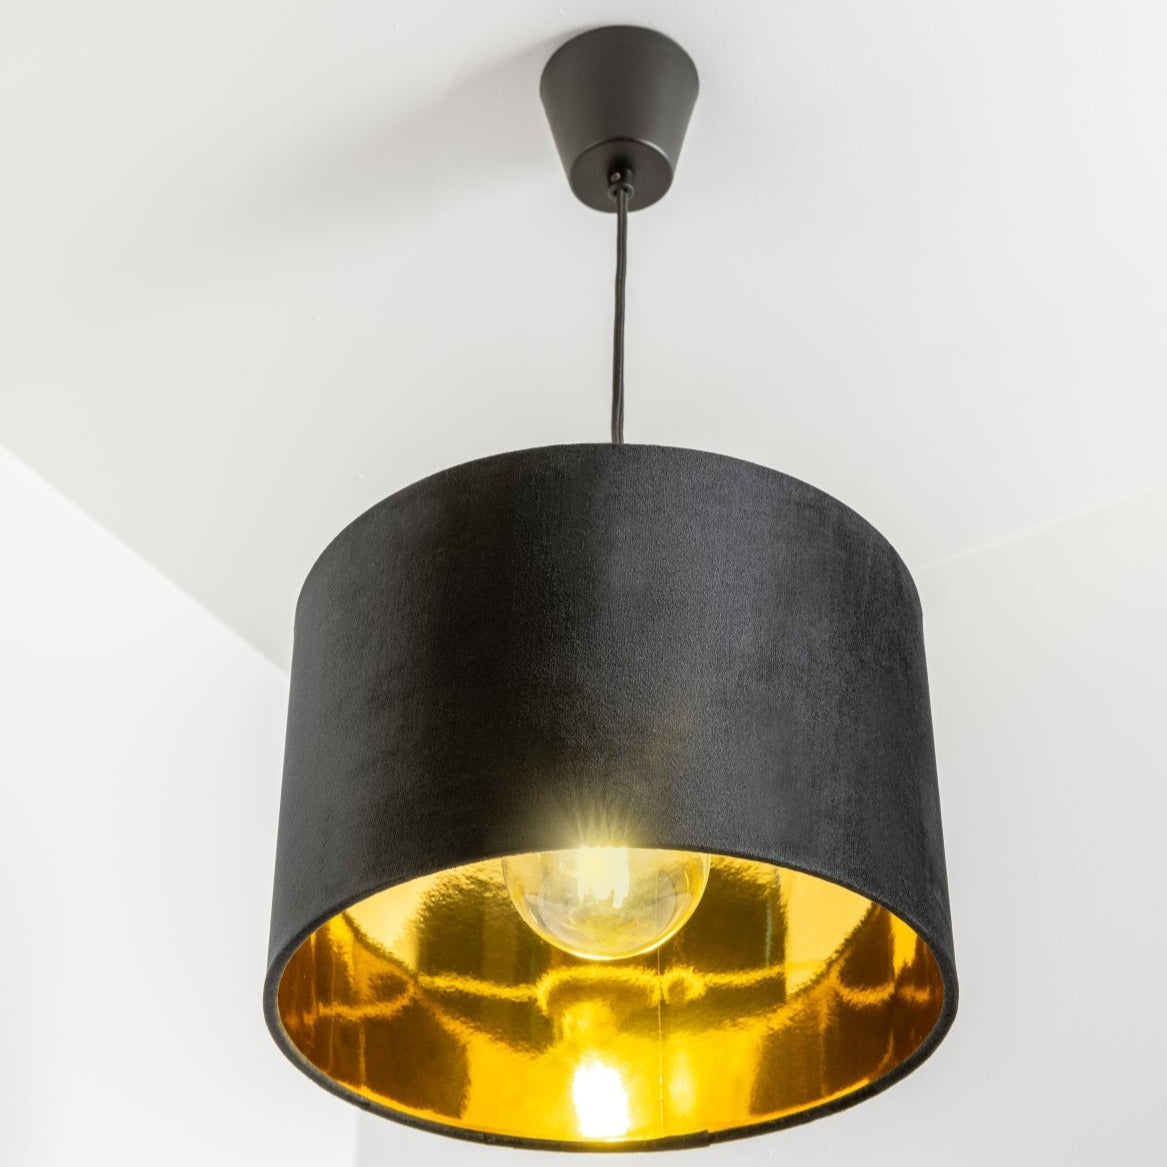 Our Nila velvet shade is sophisticated in appearance and we have designed the shade to  suit a range of interiors. Easy to fit, it’s crafted from high-quality velvet on the outer and has a reflective gold metallic inner. It's made to fit both a ceiling light or lamp base